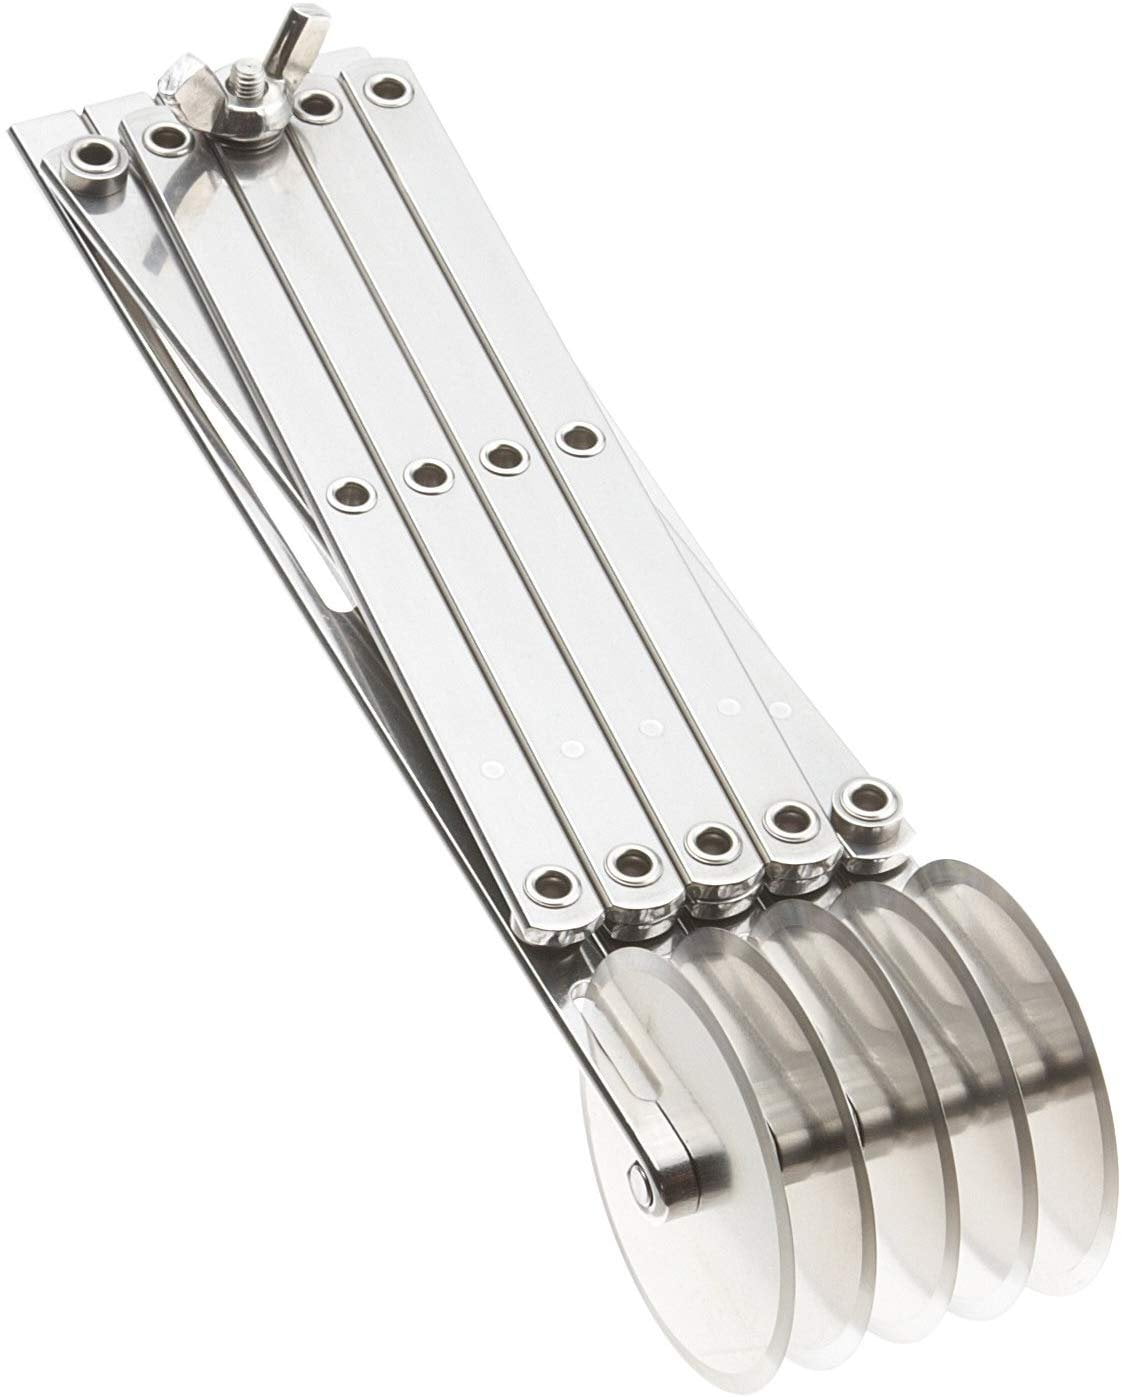 Ateco Stainless Steel Croissant Roller Cutter 15-inches long x 5-inches  diameter